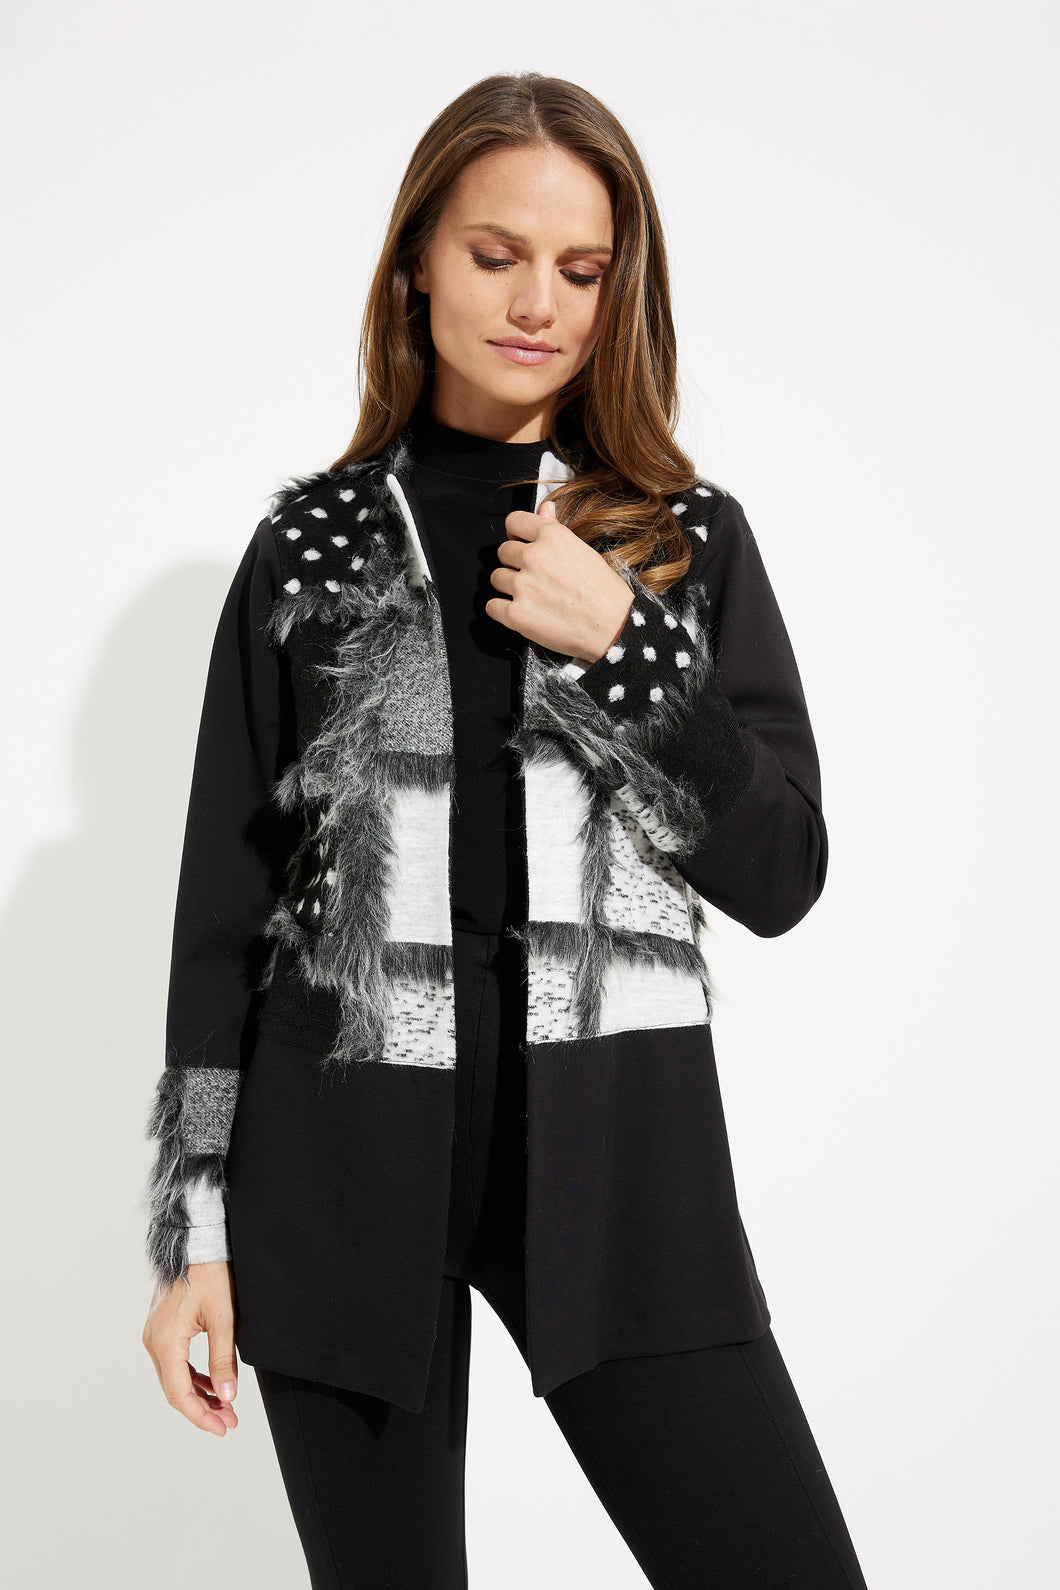 Berkely Black and Grey Abstract Patchwork and Faux Fur Cardigan- Joseph Ribkoff Style 233062